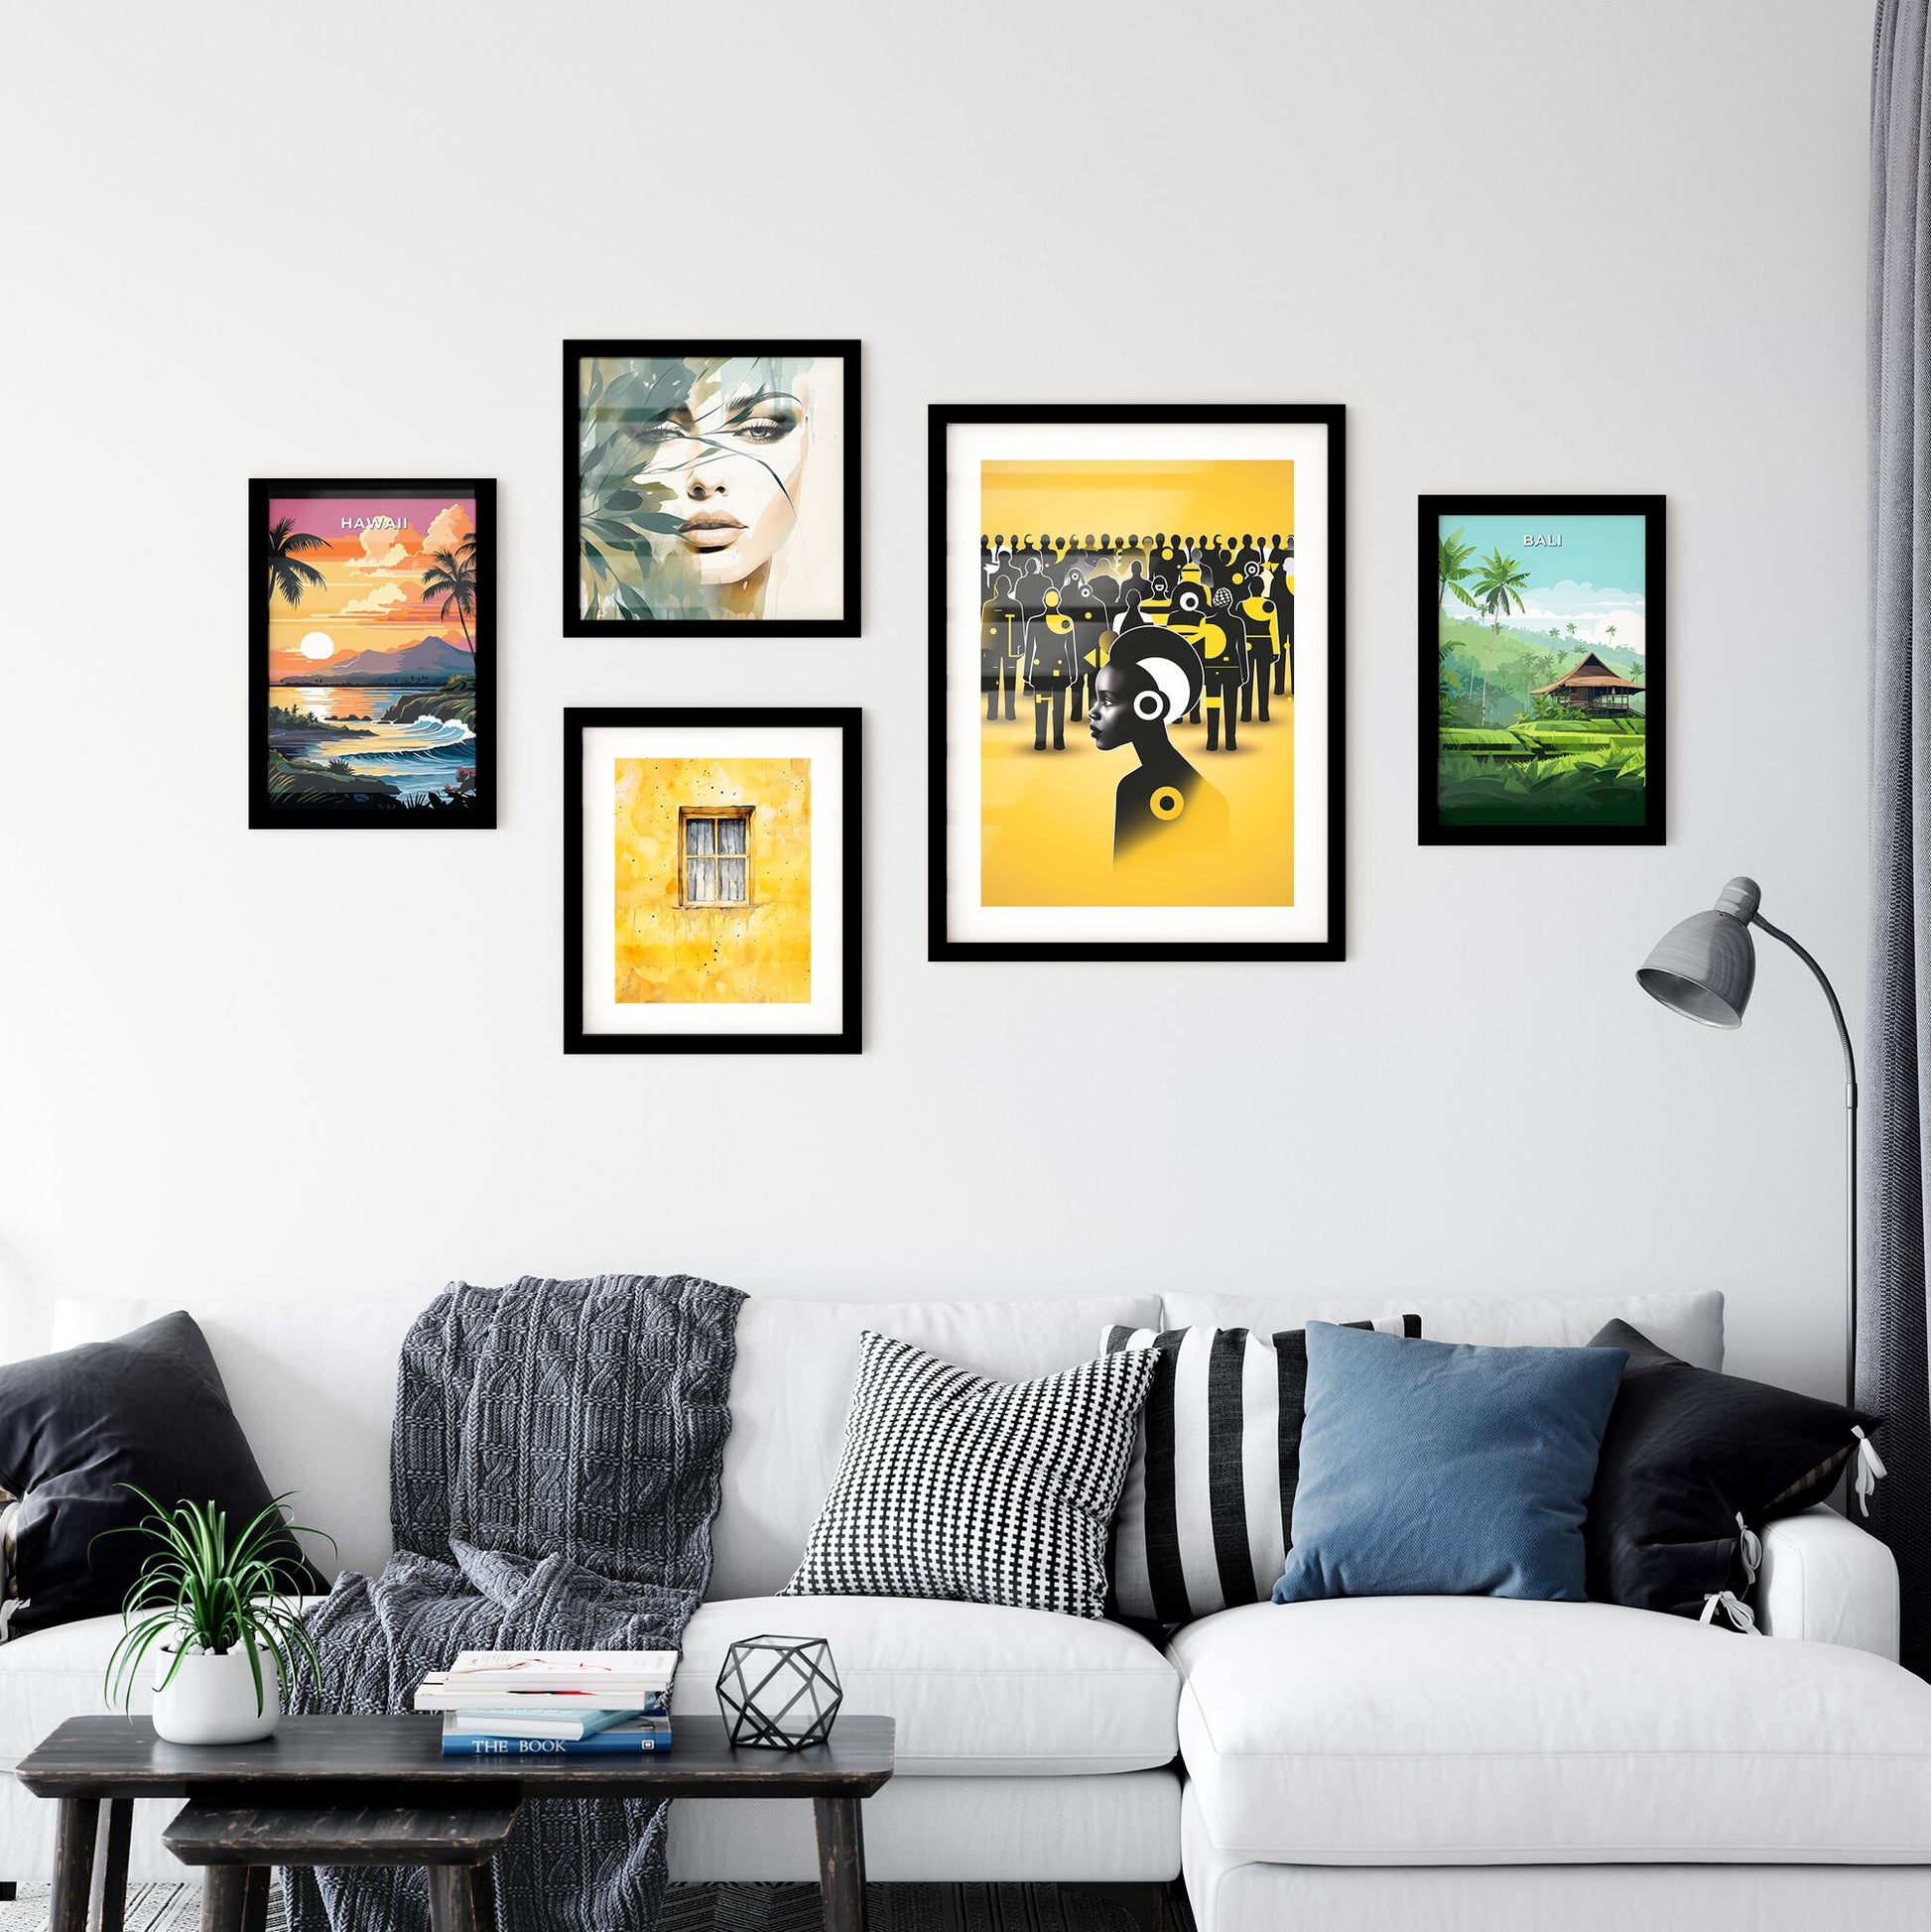 Vibrant Art Depicting Election Season with Social Media and Political Figures in a Yellow Room, Featuring Primitive Shapes and Black and White Accents Default Title